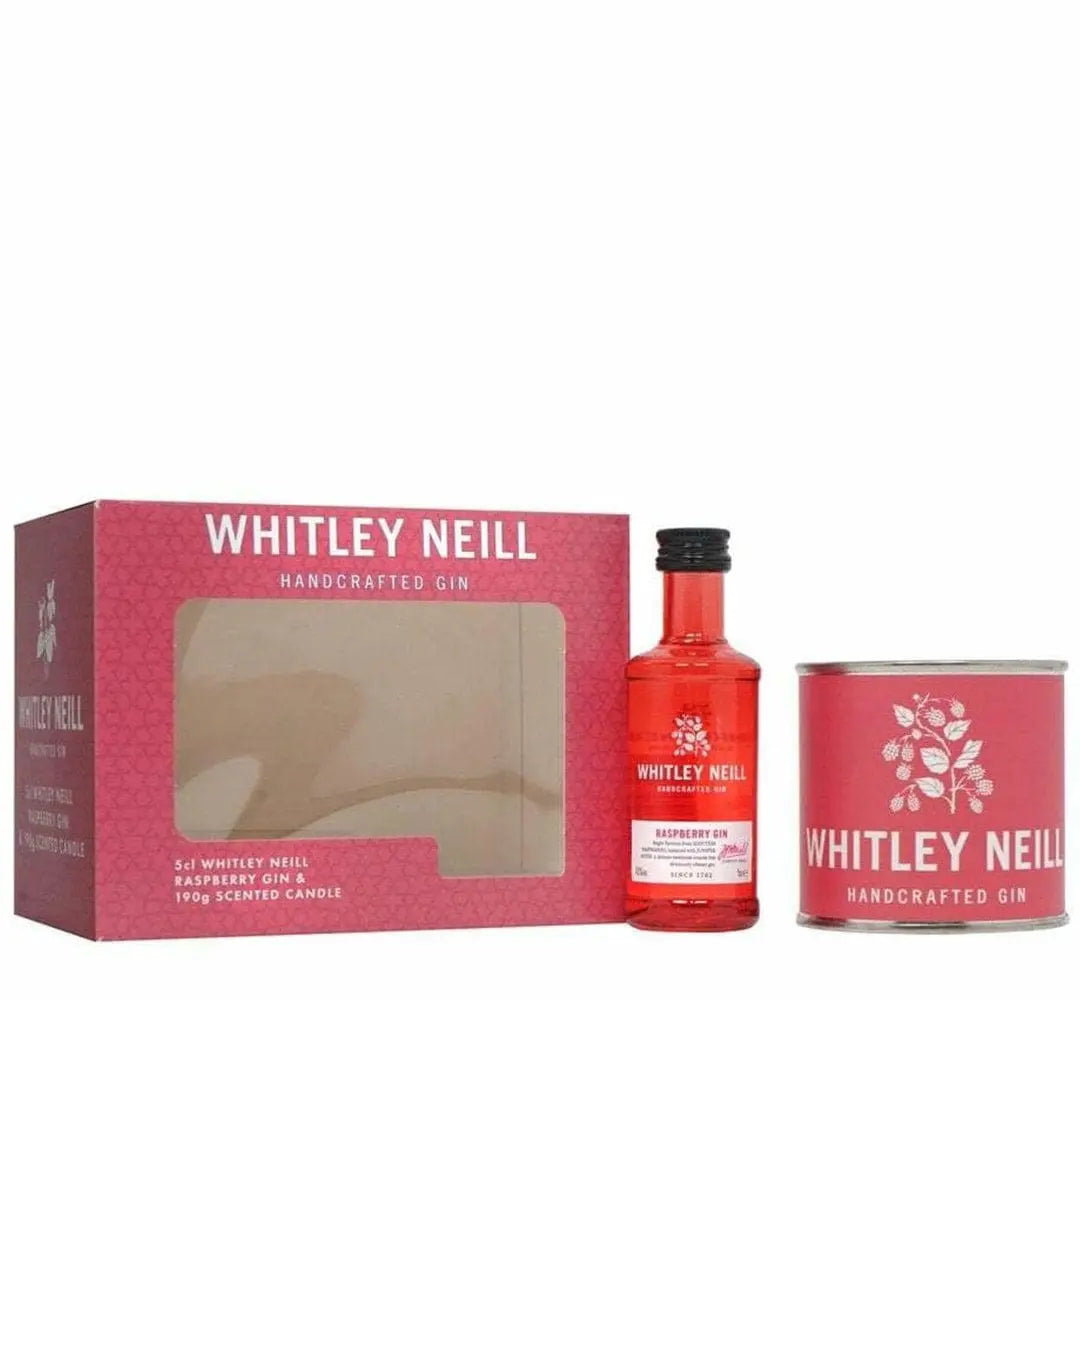 Whitley Neill Raspberry and Candle Gift Set, 5 cl Spirit Miniatures